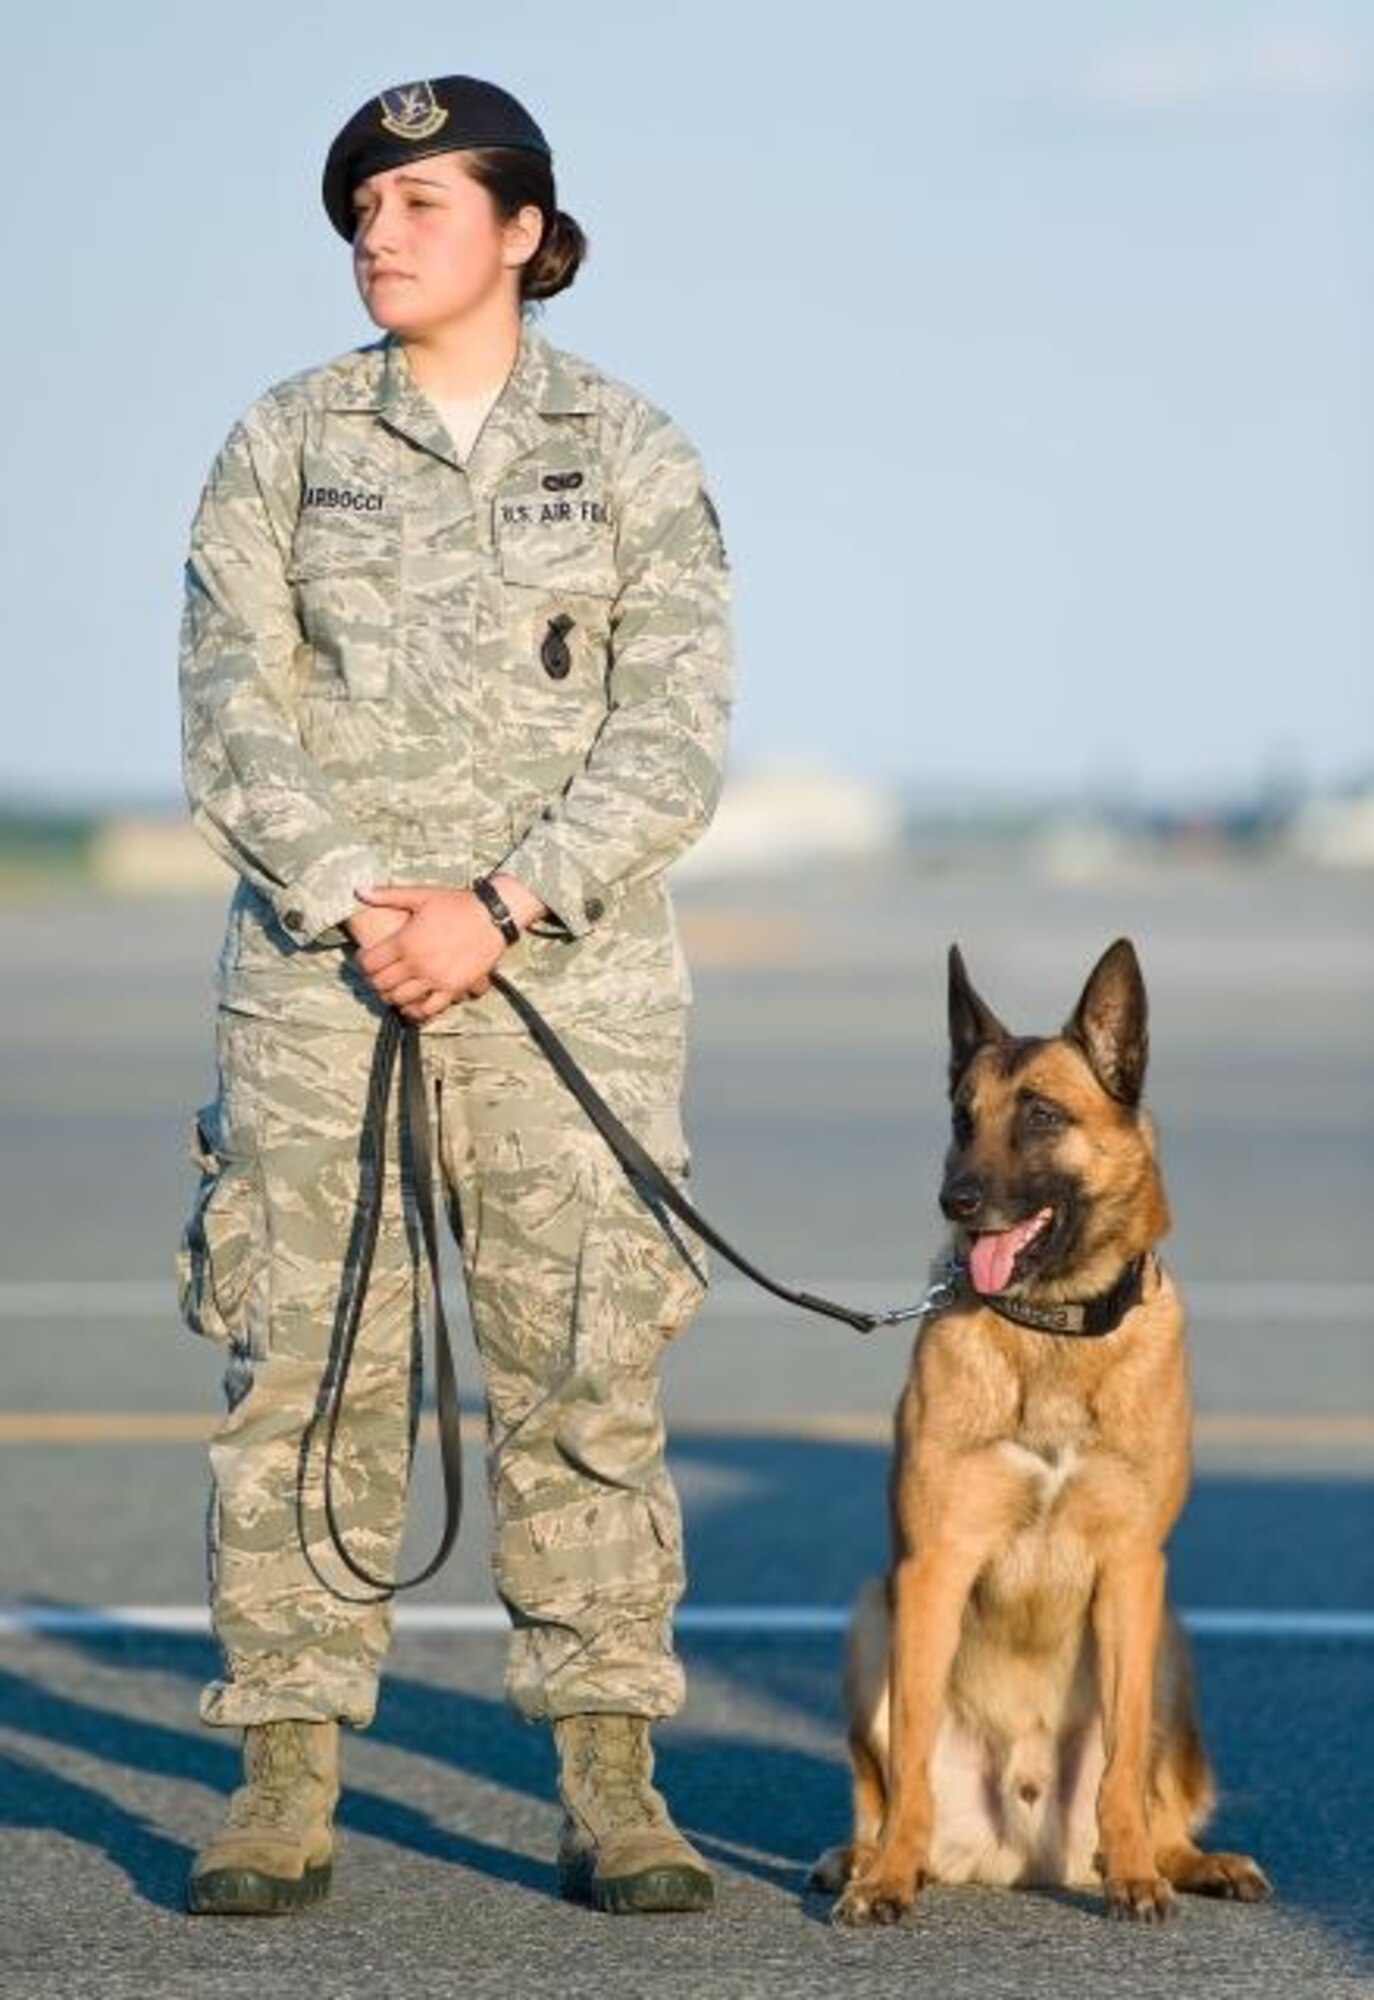 Staff Sgt. Tatiana Carbocci, former 436th Security Forces Squadron military working dog handler, and her K-9, Renzo, pay final respects to a U.S. Navy MWD handler during a dignified transfer June 2, 2014, at Dover Air Force Base, Del. Renzo was adopted by Carbocci after retiring from eight years of active duty service with the 436th SFS. (Courtesy Photo)